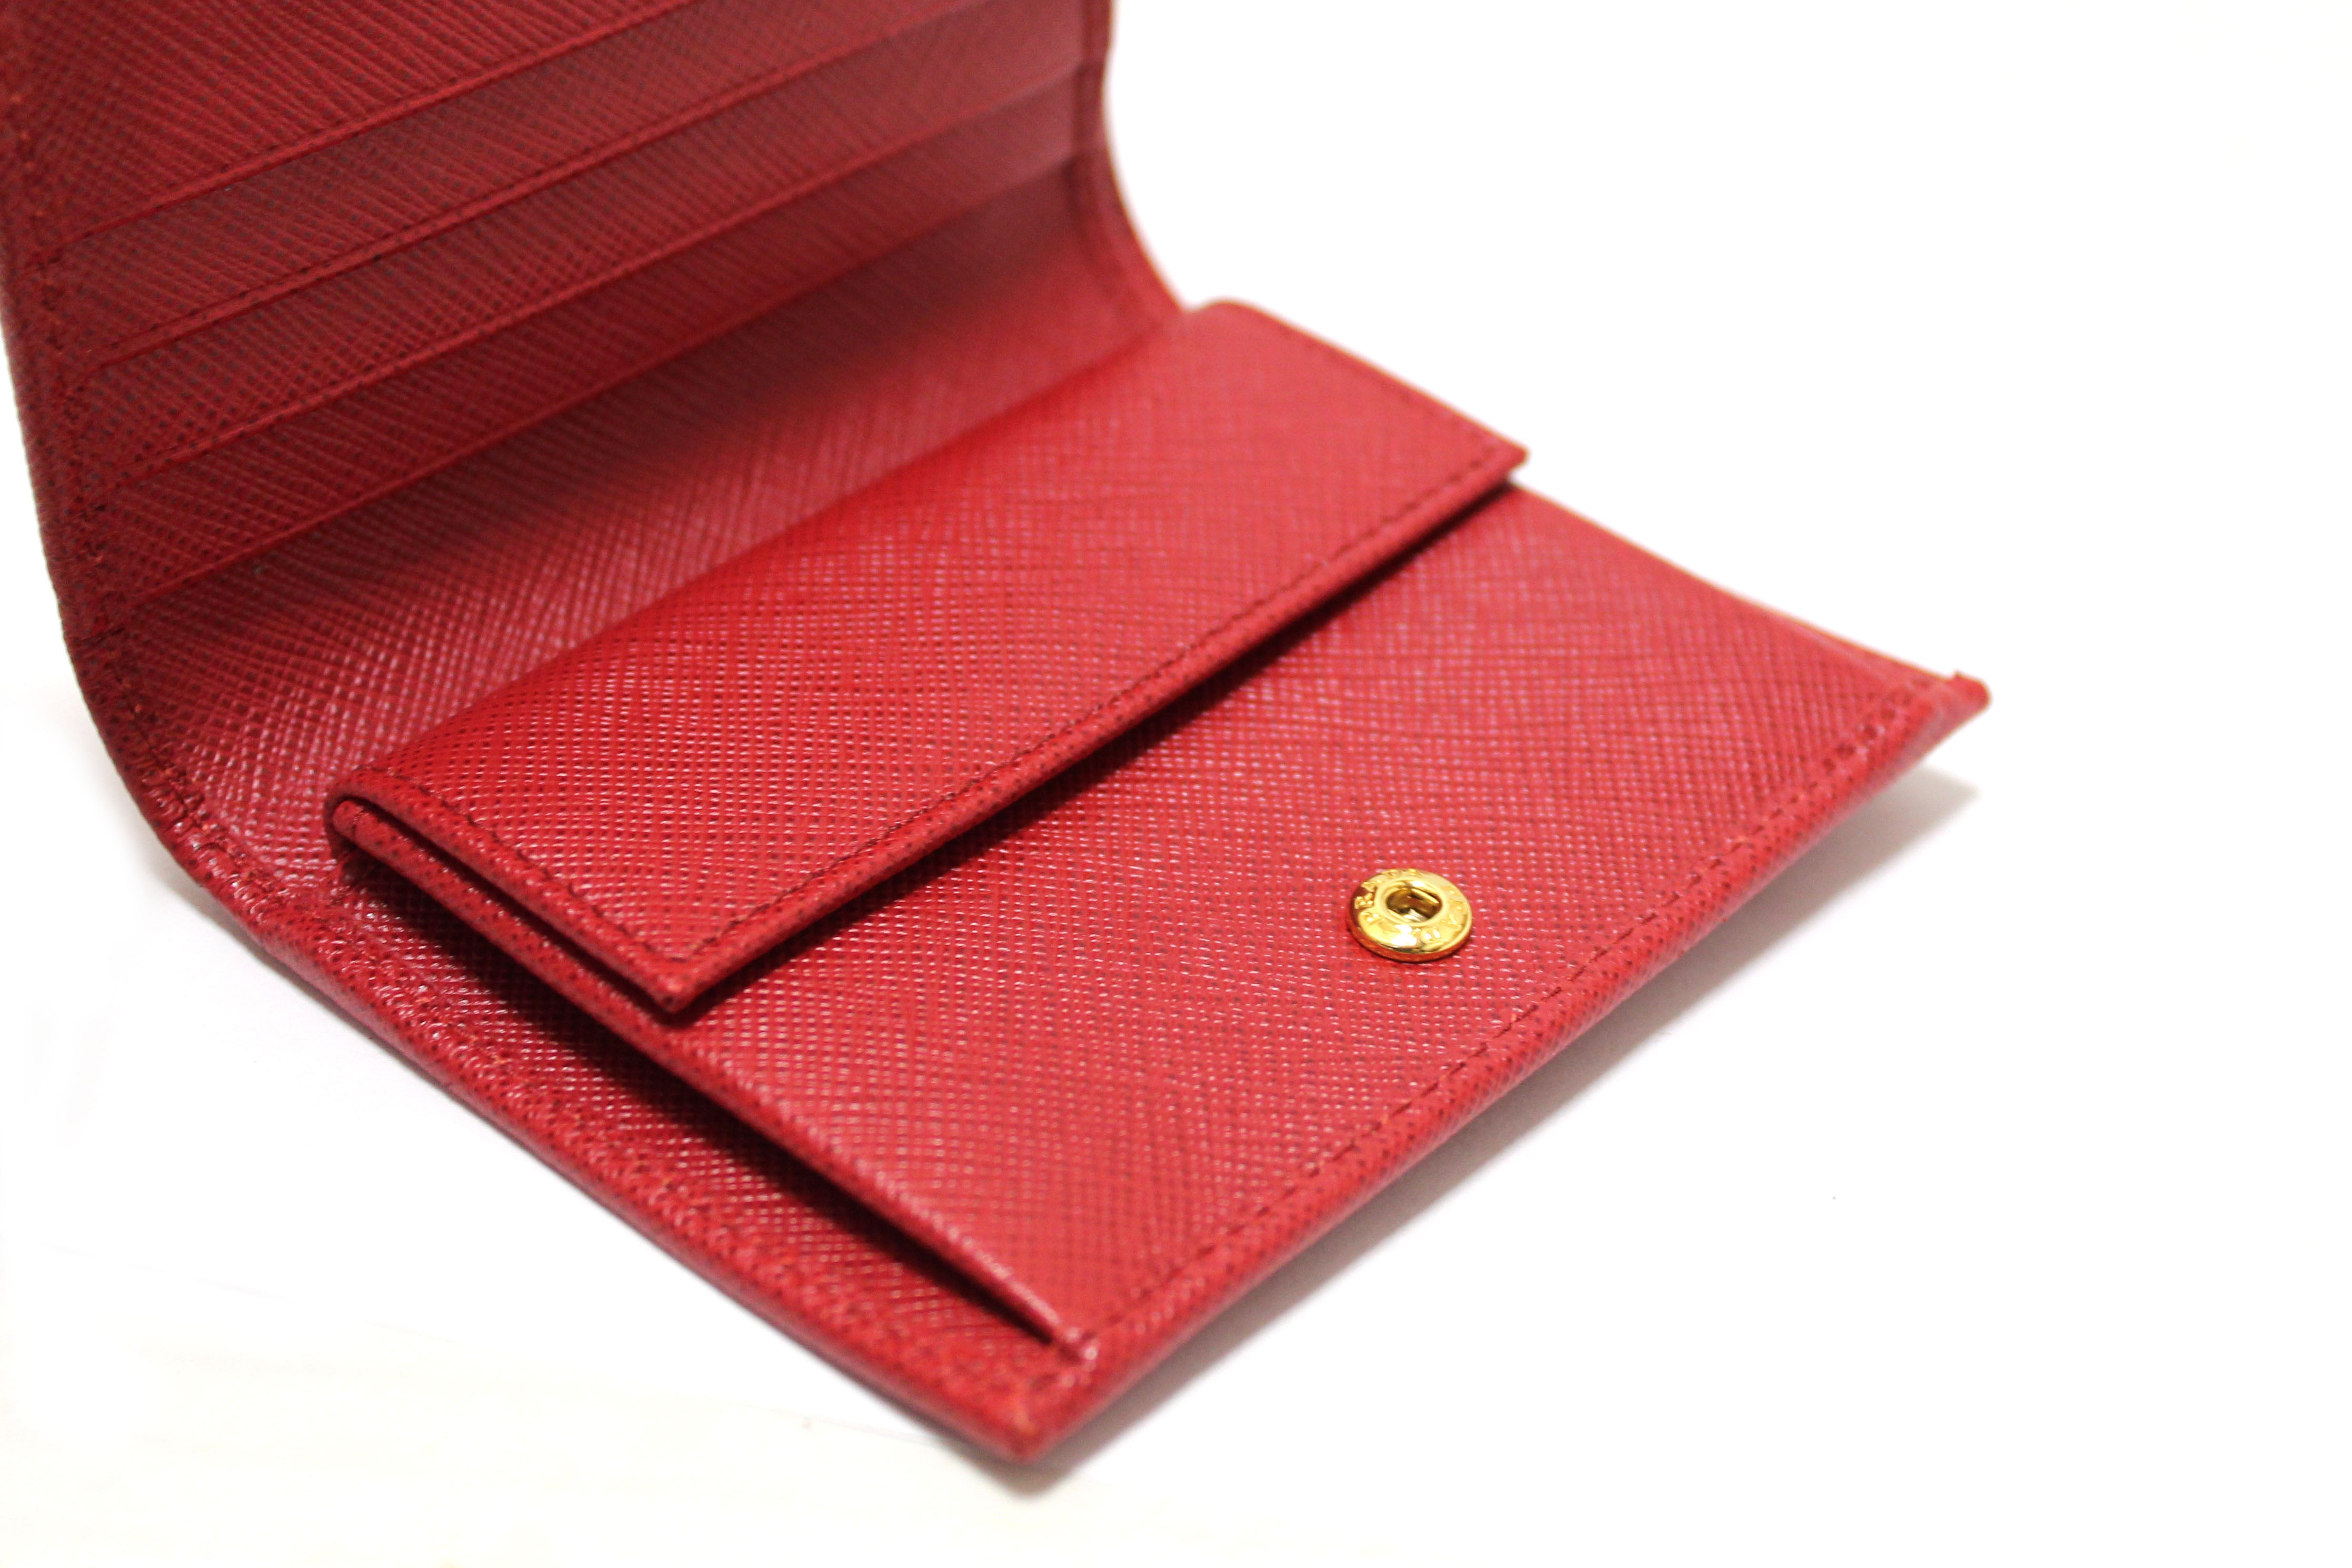 NEW Authentic Prada Red Saffiano Leather Small Bi-fold Wallet